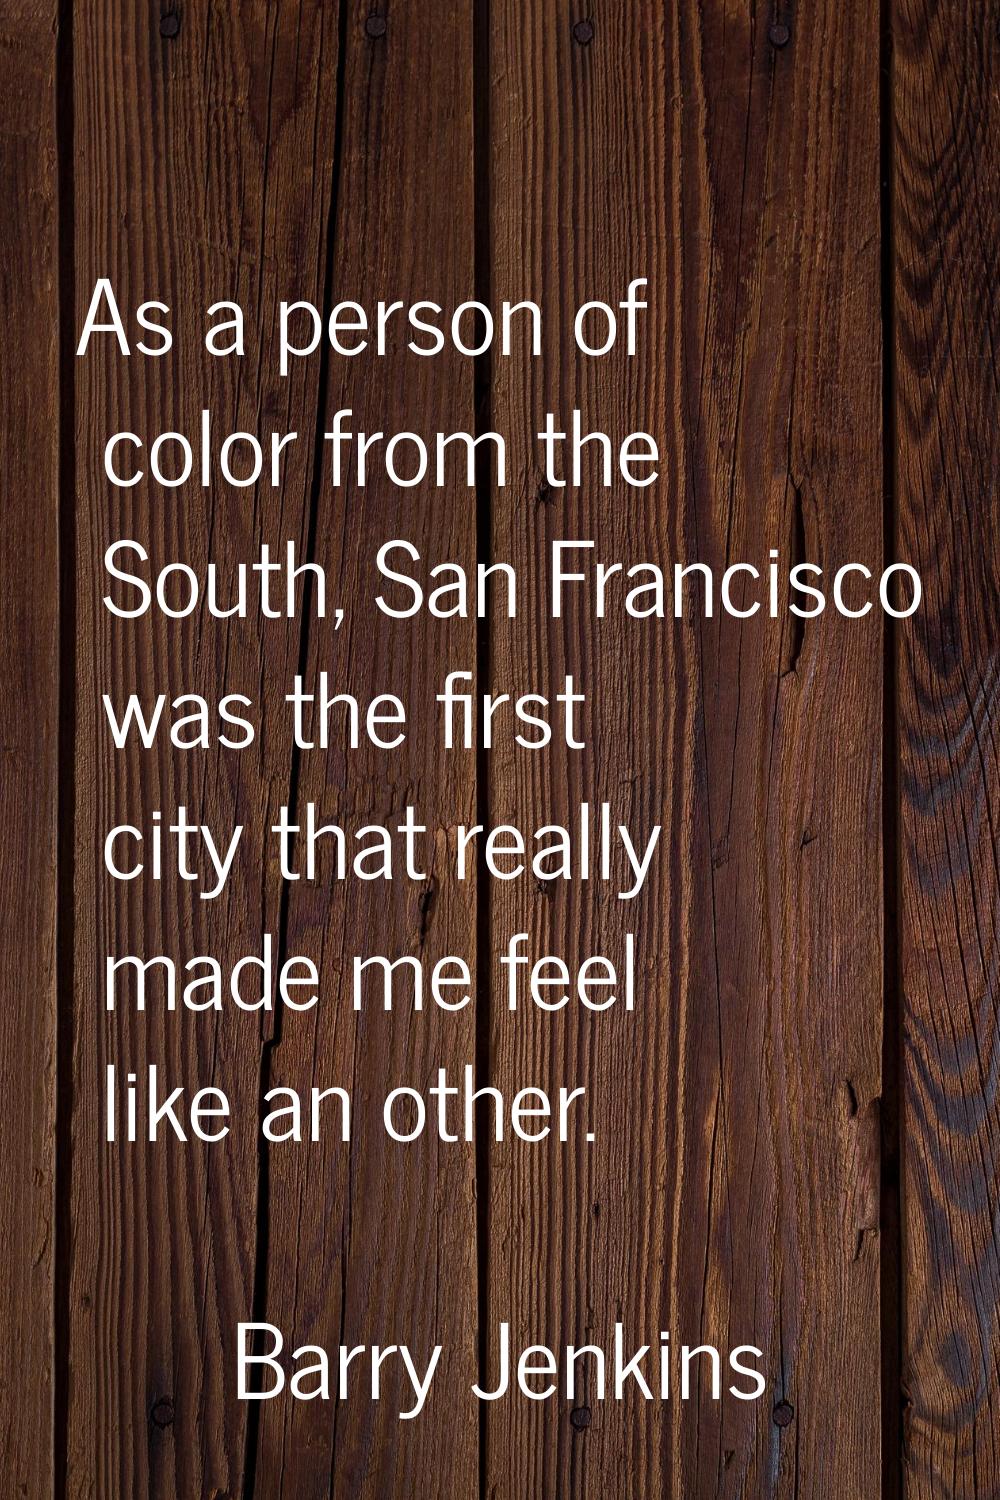 As a person of color from the South, San Francisco was the first city that really made me feel like